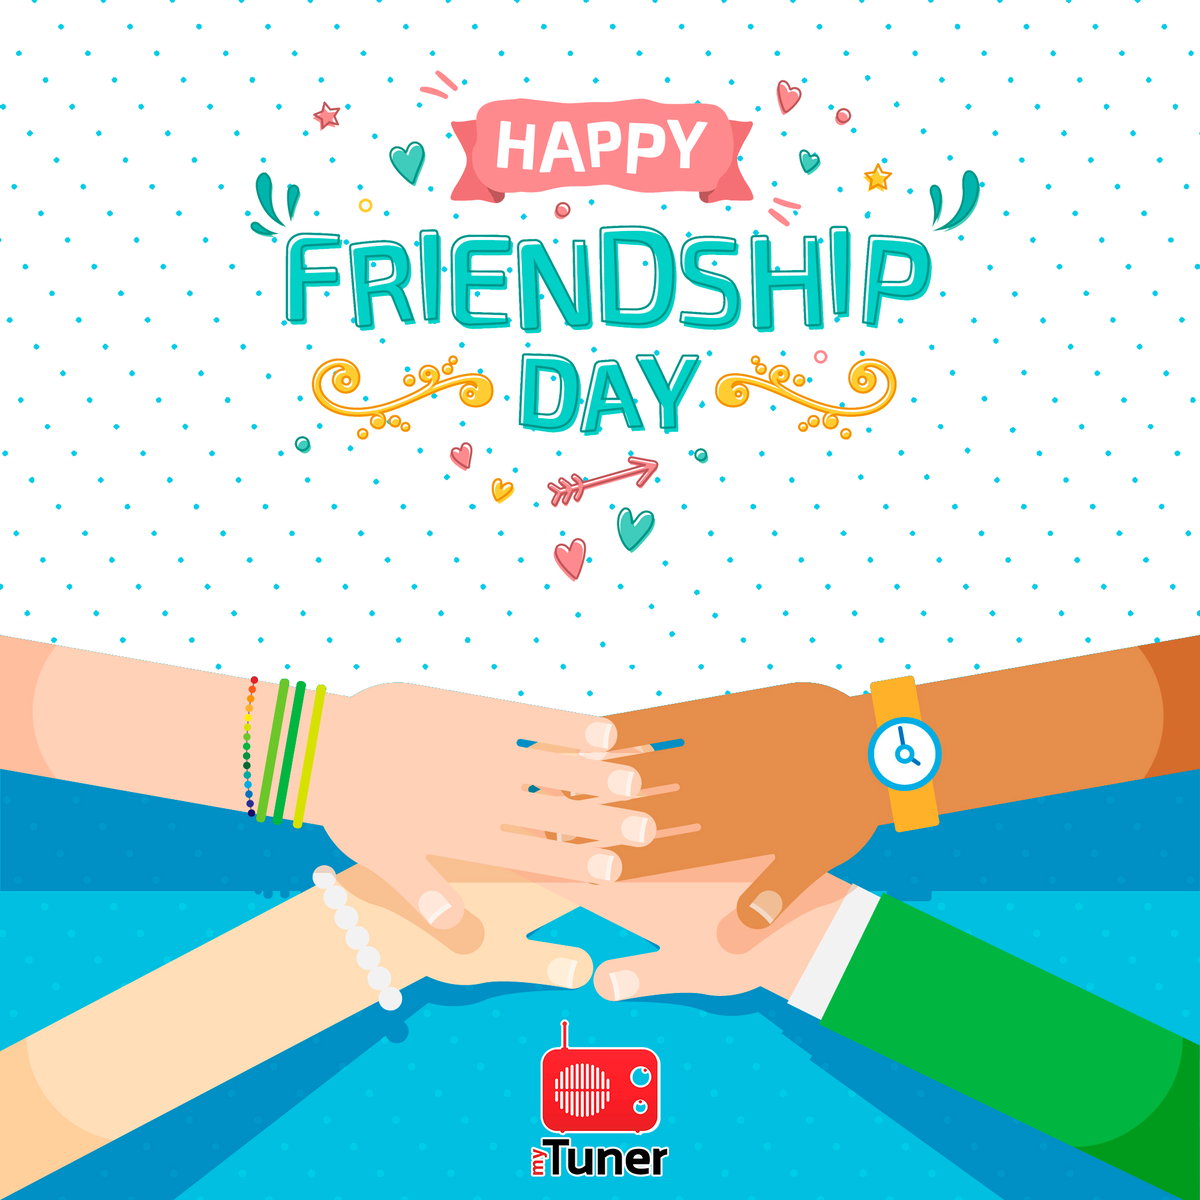 Today is the International Day of Friendship! 🤪 Help your friends widen their musical horizons and discover new bands and music genres with myTuner. 🎧 Download now myTuner Radio - khw62.app.goo.gl/fb #July30 #myTunerRadio #InternationalDayofFriendship